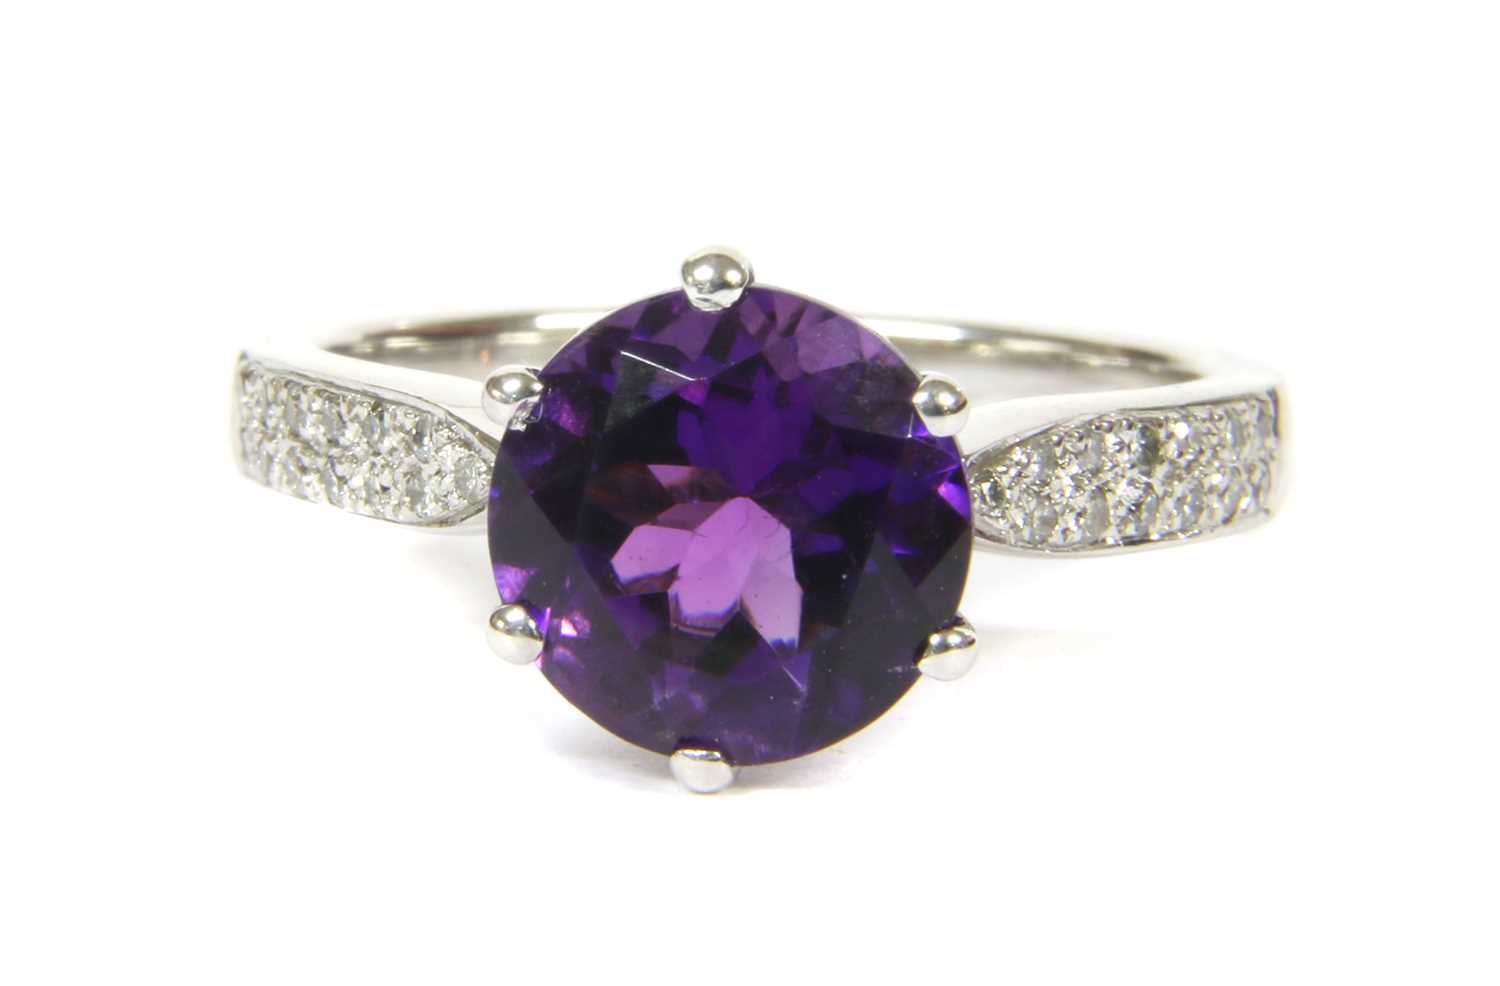 Lot 155 - An 18ct white gold amethyst and diamond ring